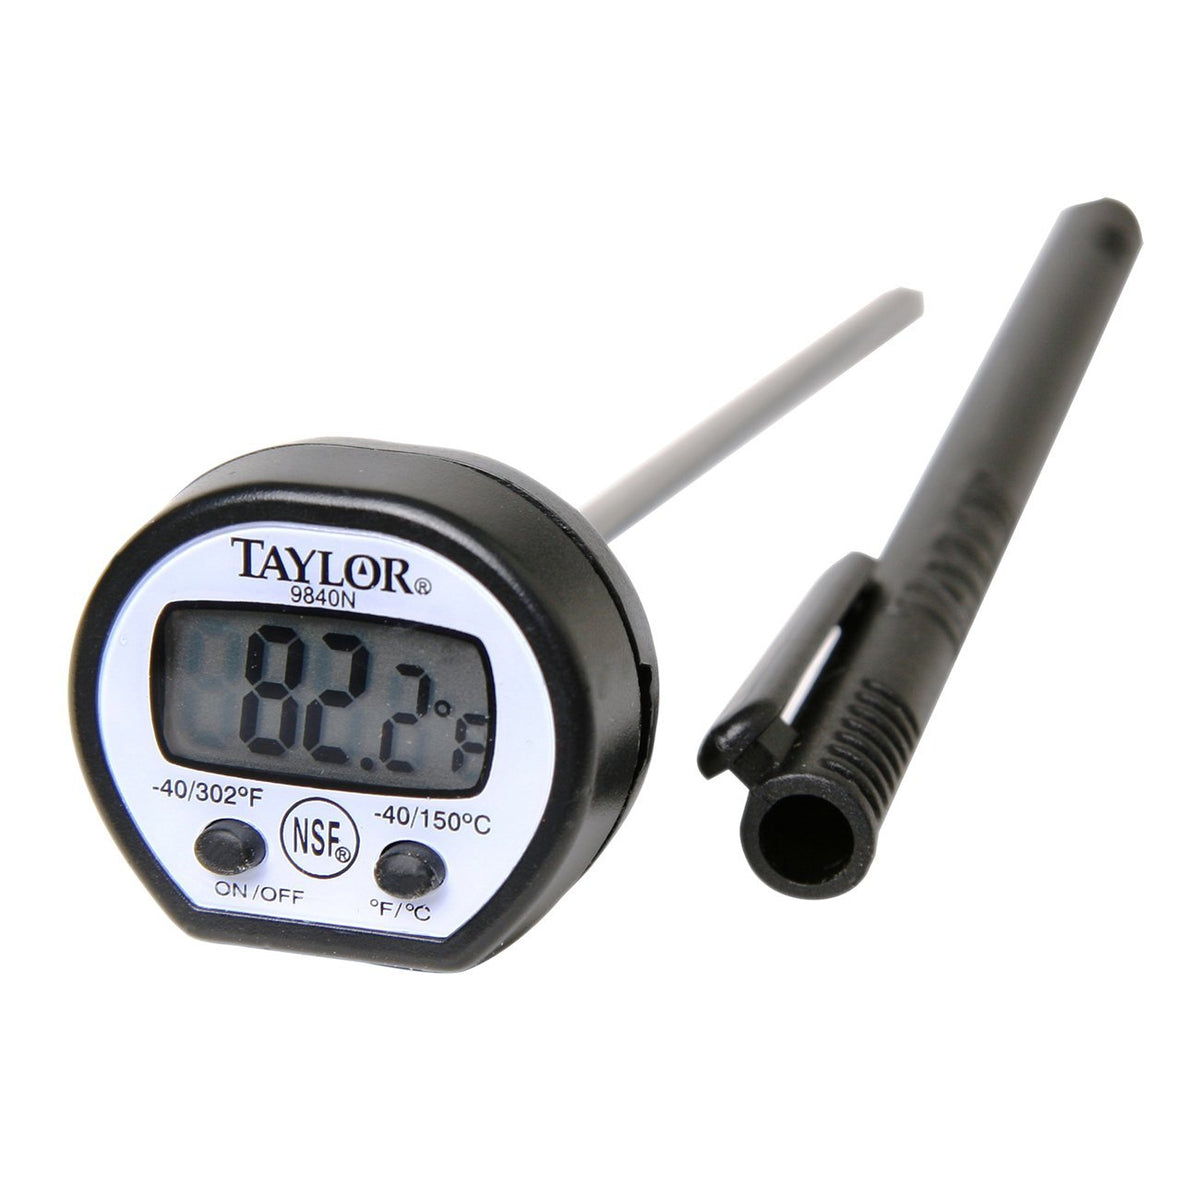 TruTemp Instant Read Thermometer - For Kitchen